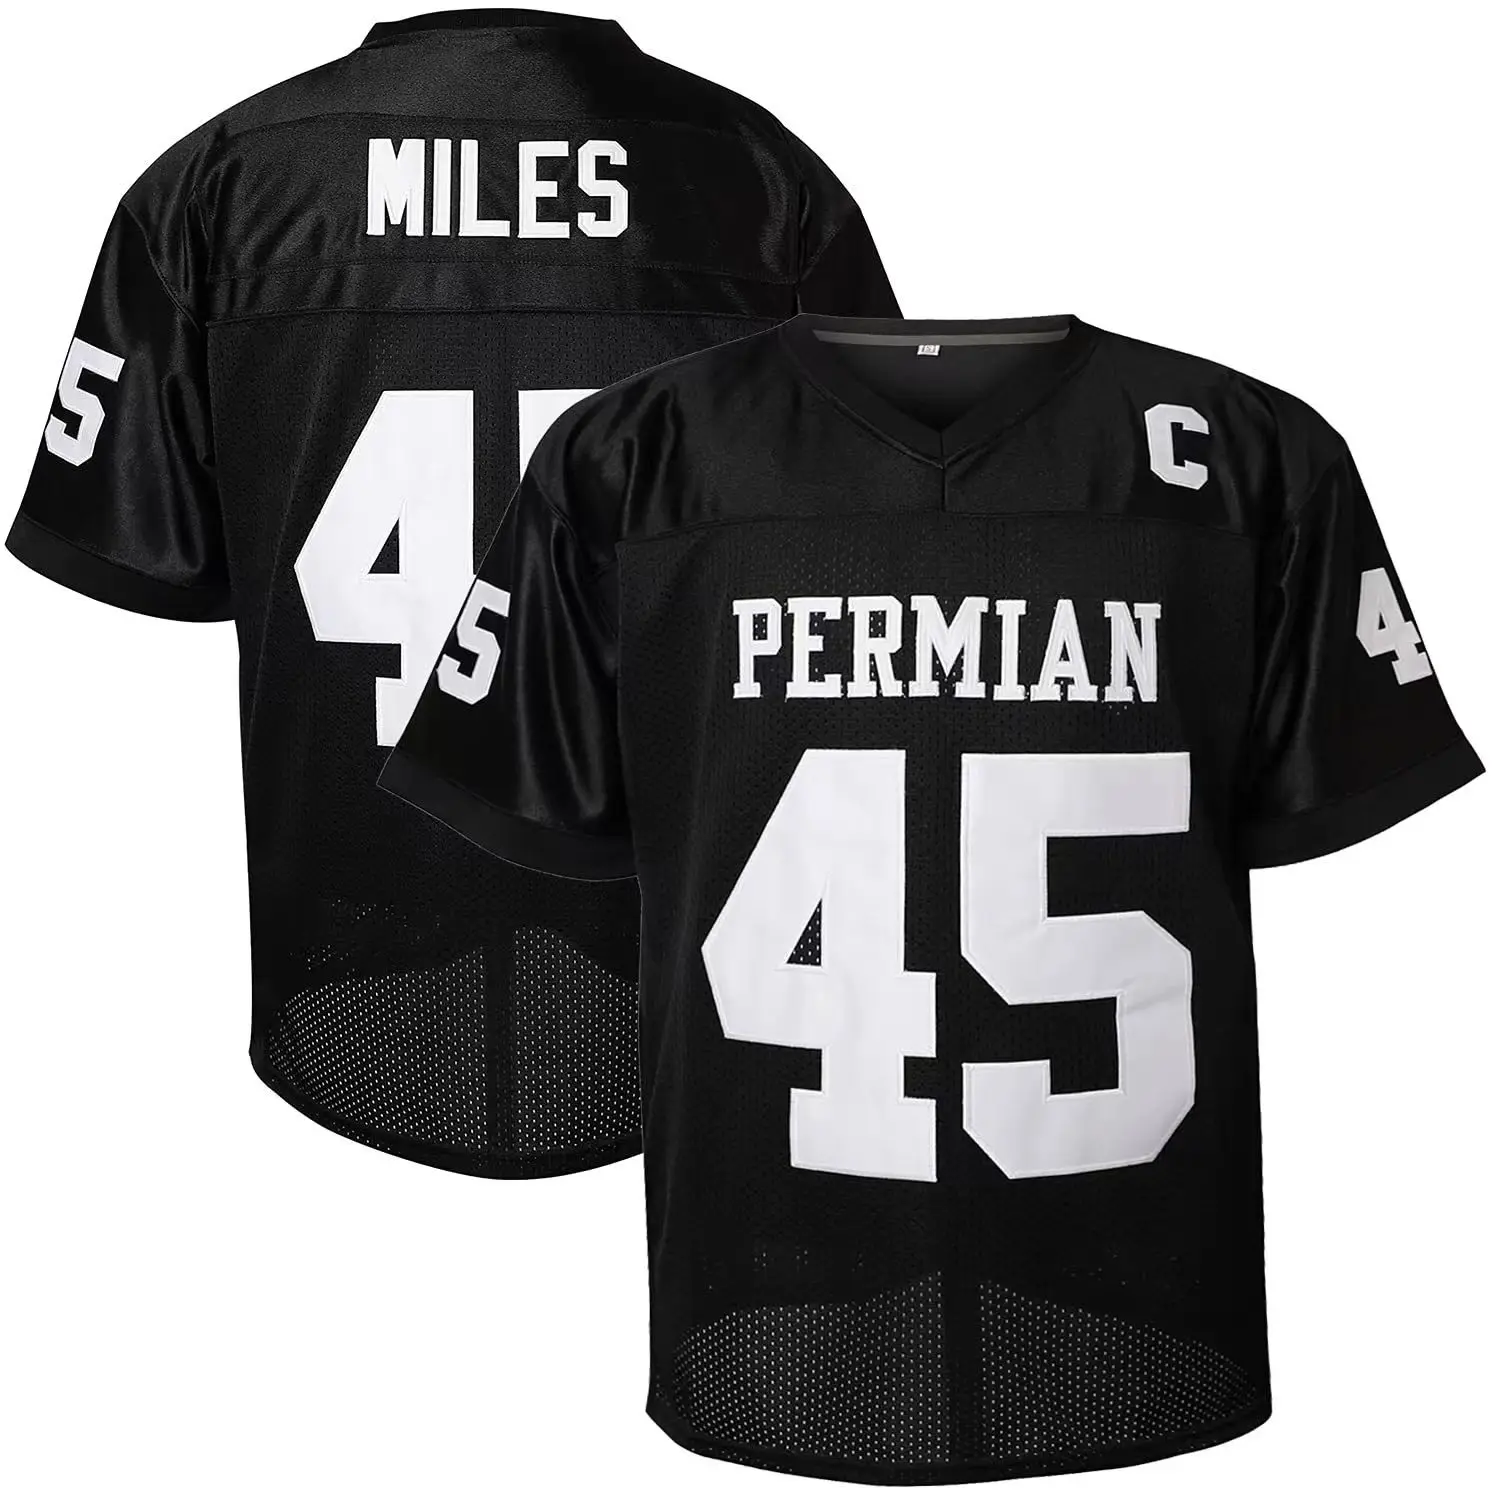 Boobie Miles #45 Permian American football Sport jersey Shirt Embroidery sewing Outdoor sportswear loose clothes High Quality